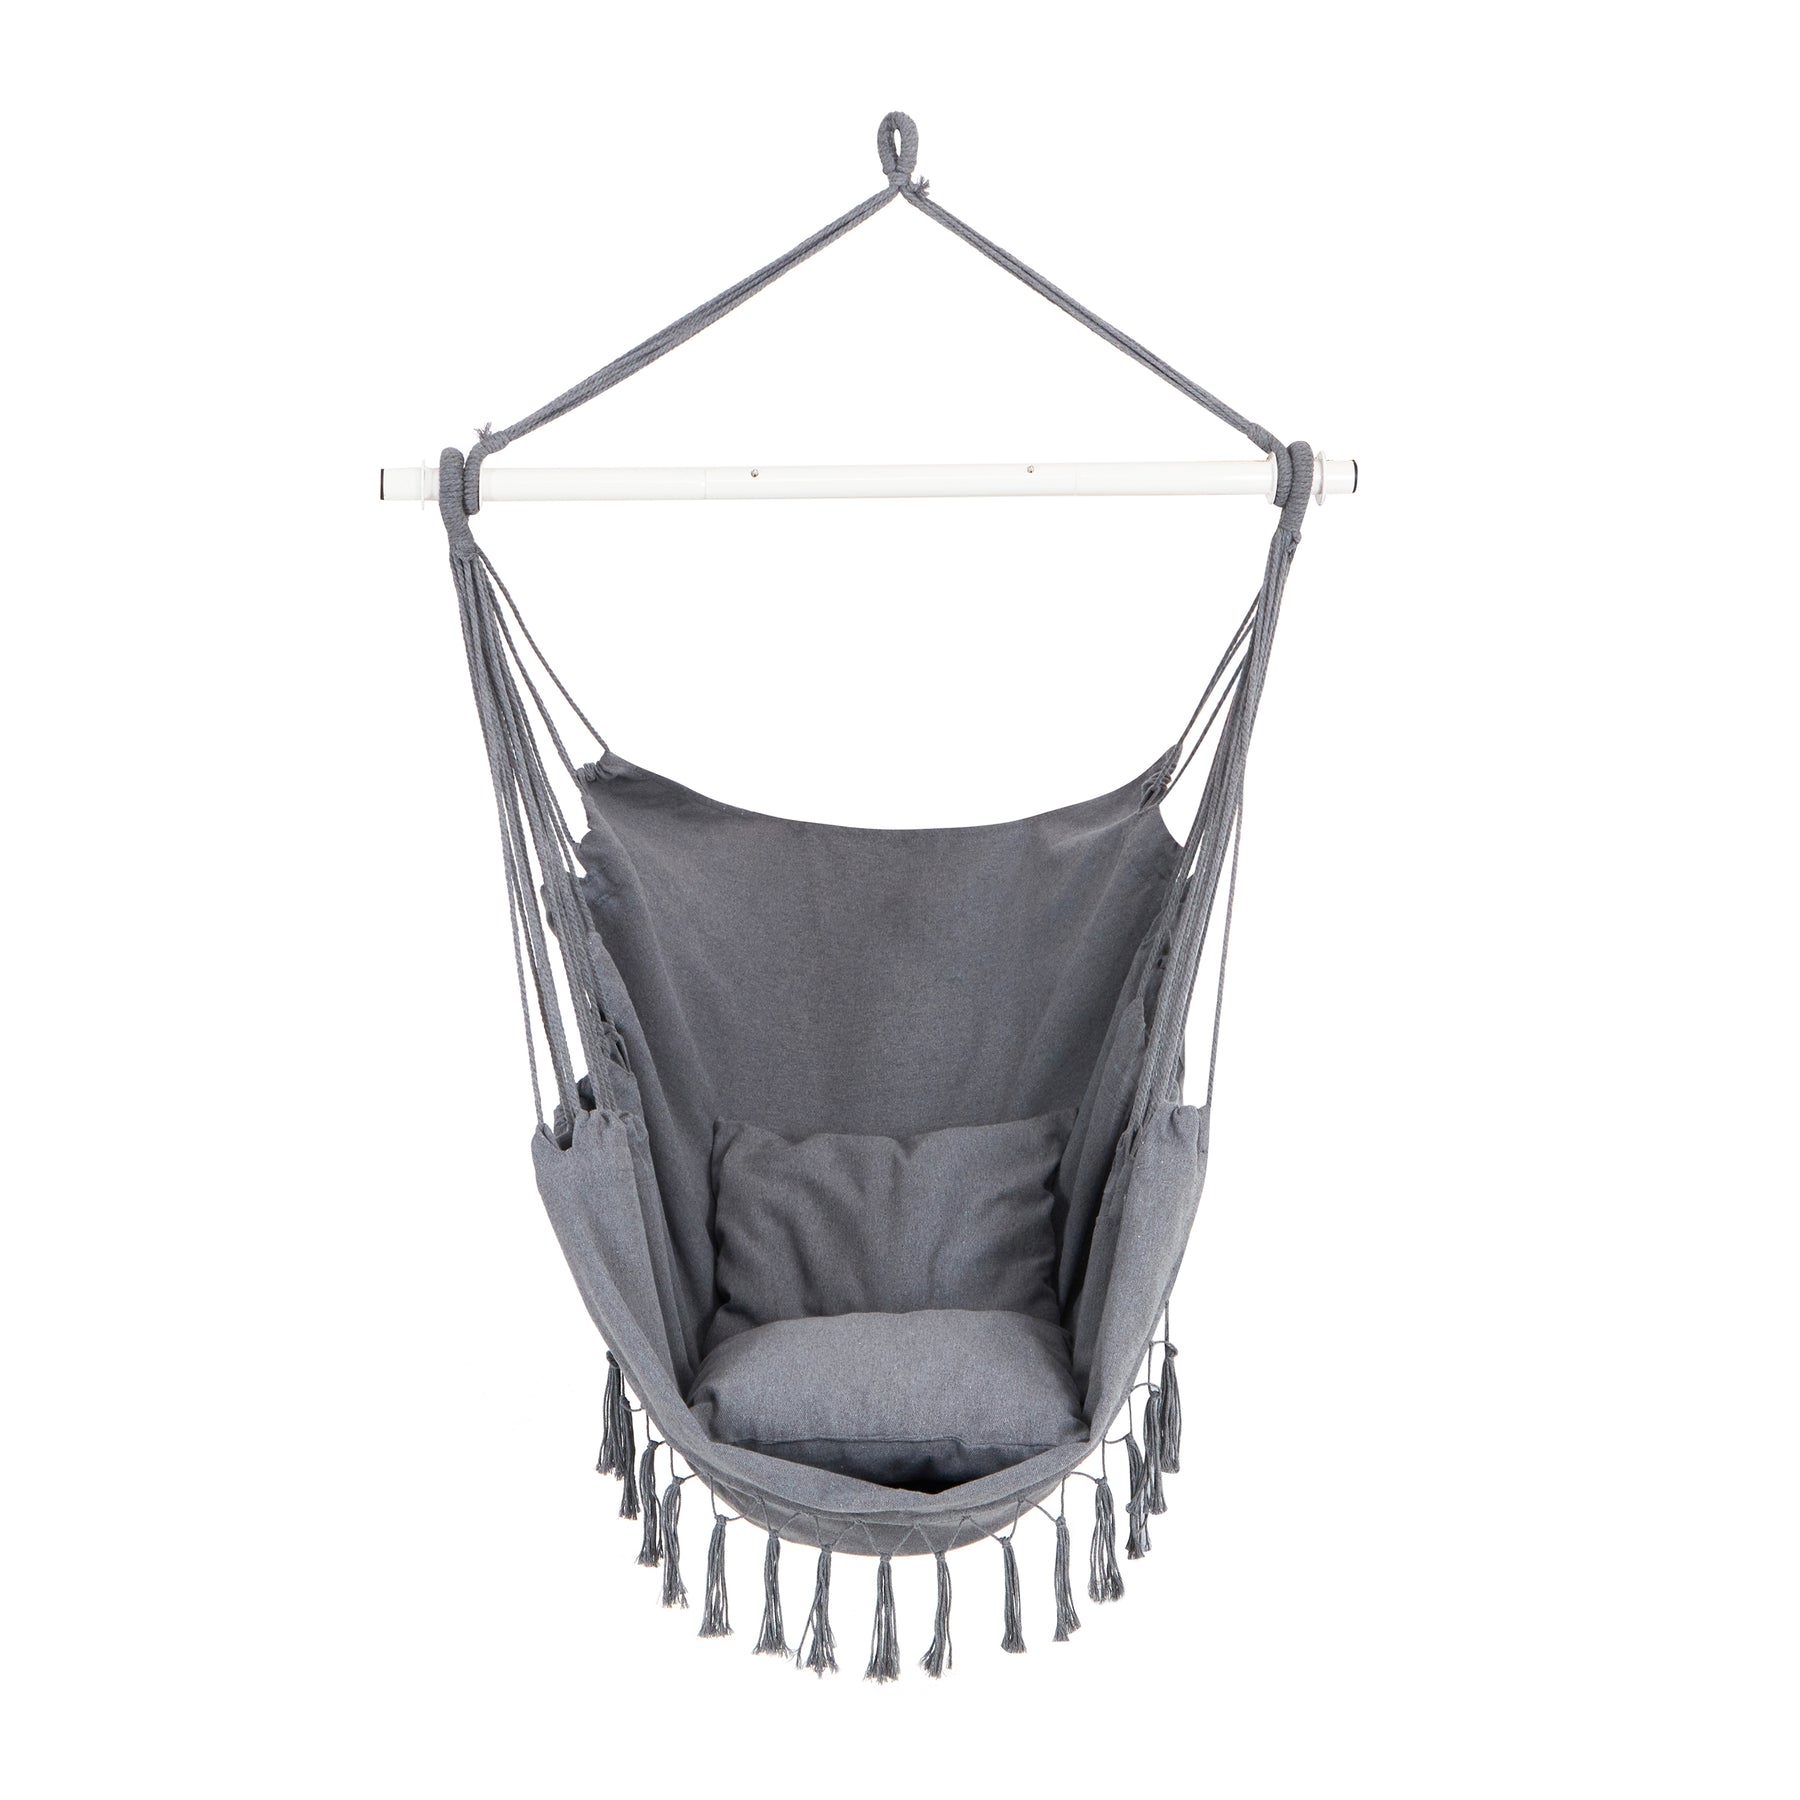 Bliss Hammocks 40-inch Wide Fringed Hammock Chair with 2 Matching Square Pillows, Built-In Side Pocket, and Steel Spreader Bar in the gray color variation.